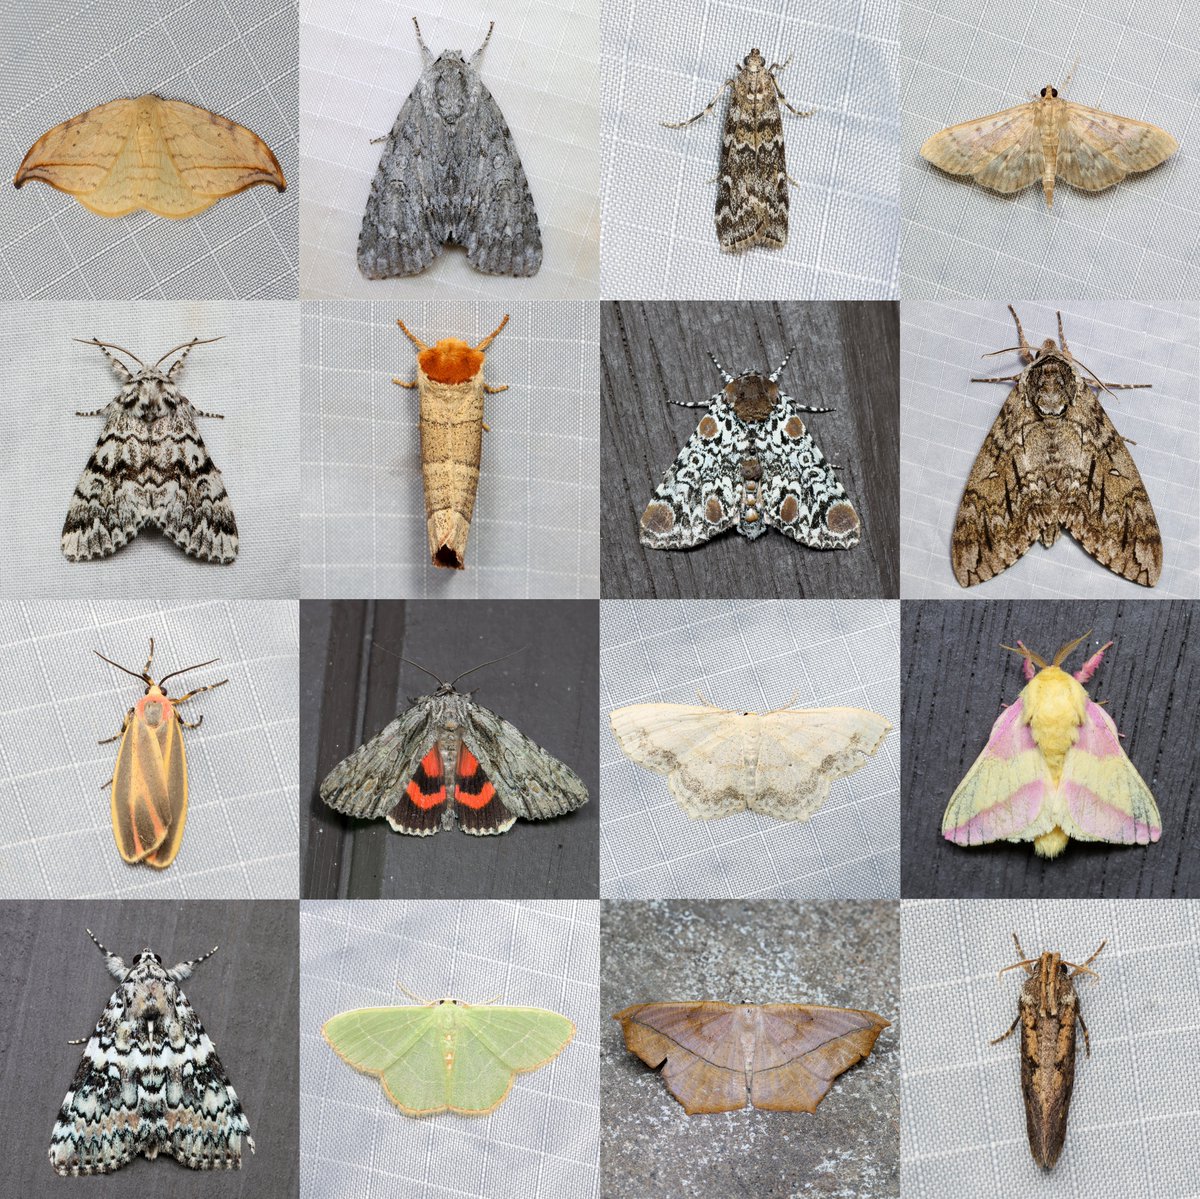 Happy #NationalMothWeek. Here's a quilt of moths I saw at an event last night.